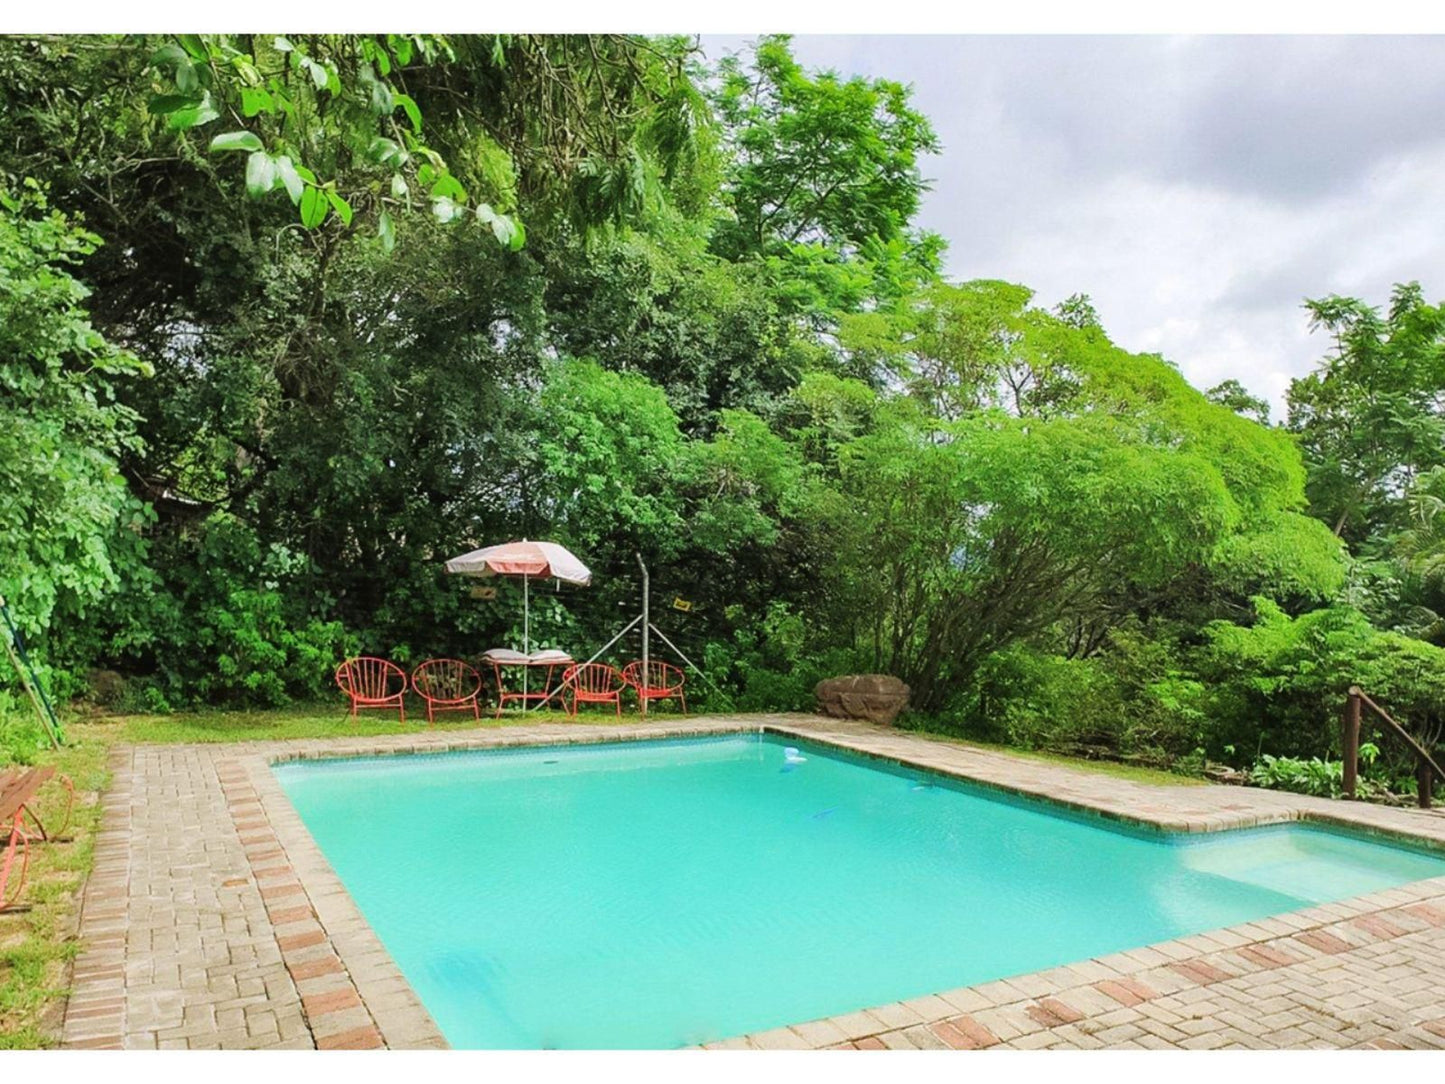 Impala Self Catering Chalets Numbi Park Hazyview Mpumalanga South Africa Garden, Nature, Plant, Swimming Pool